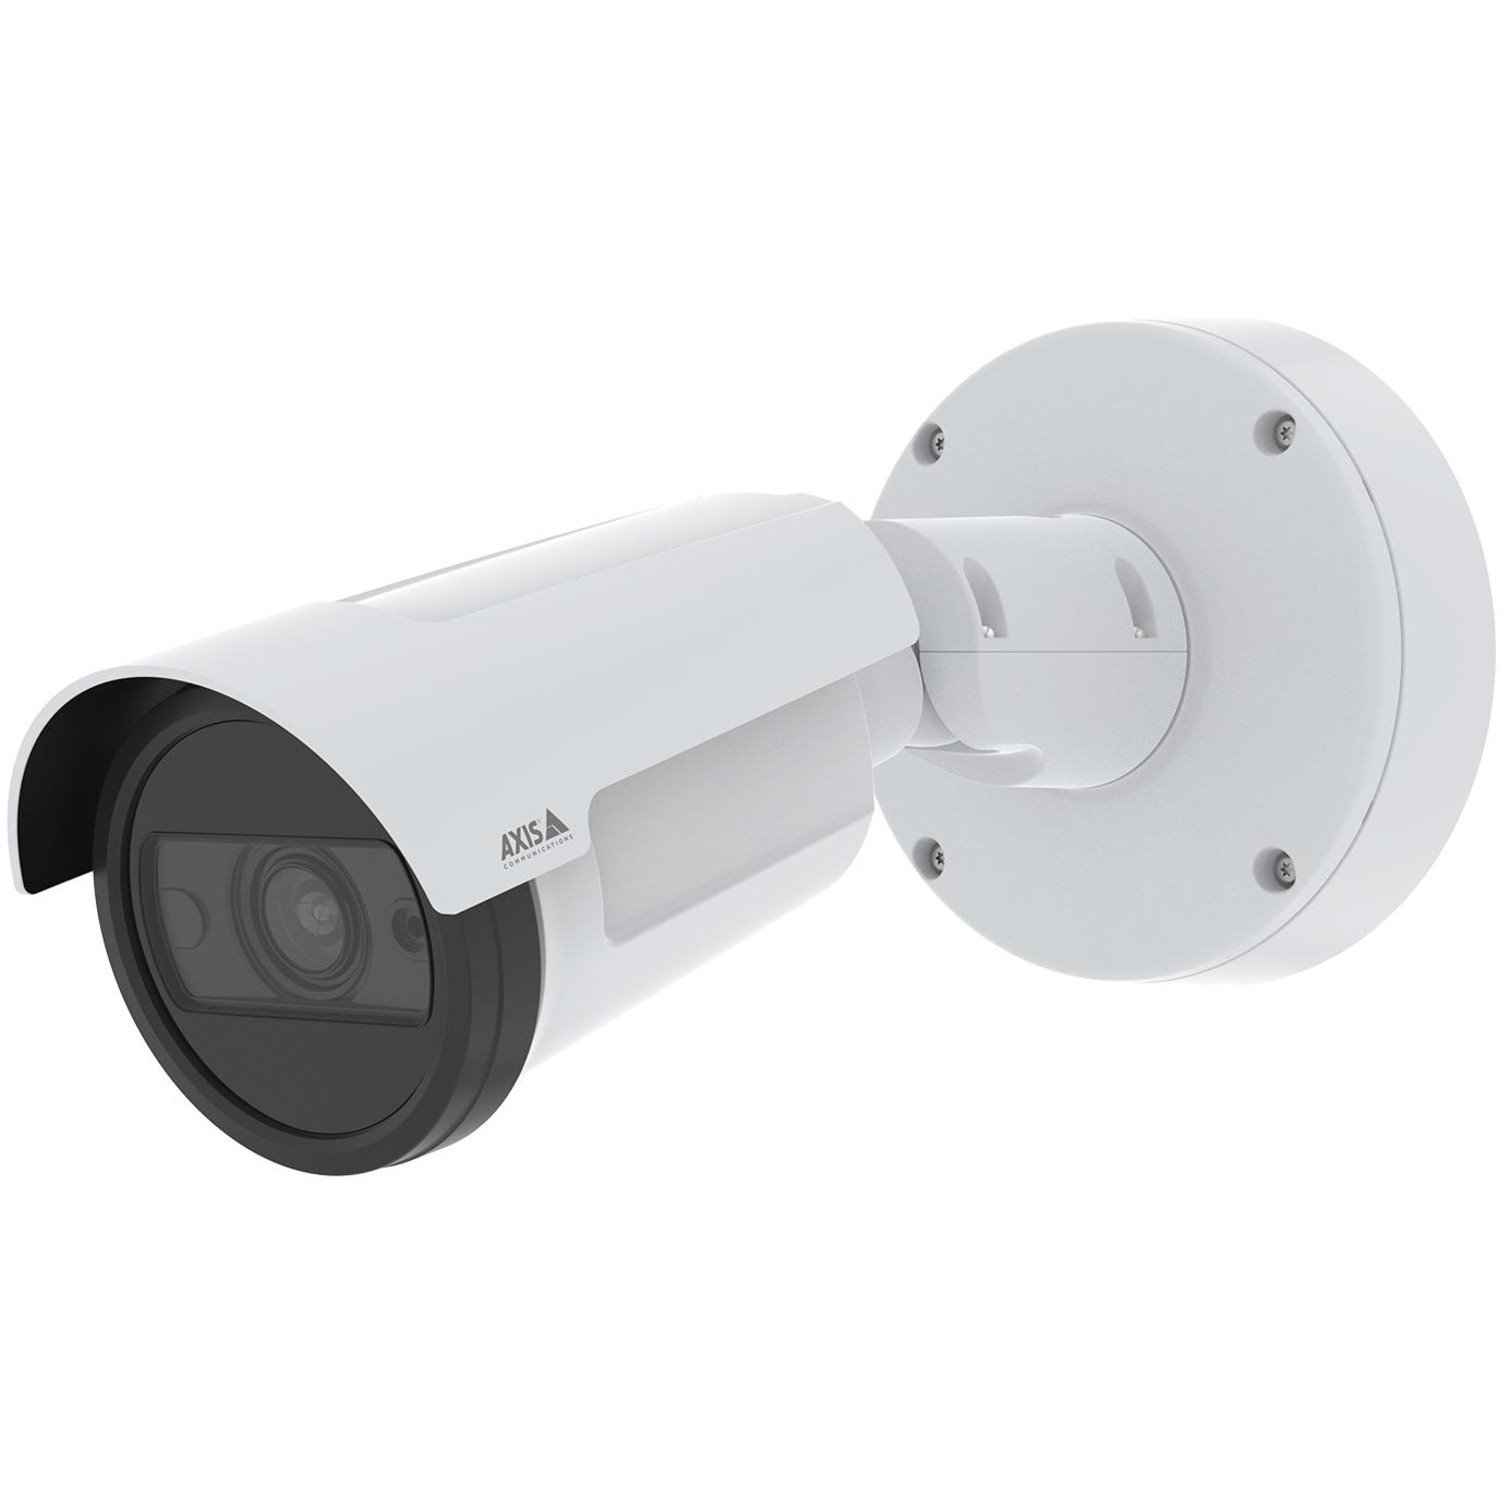 AXIS P1465-LE 2 Megapixel Outdoor Full HD Network Camera - Color - Bullet - TAA Compliant